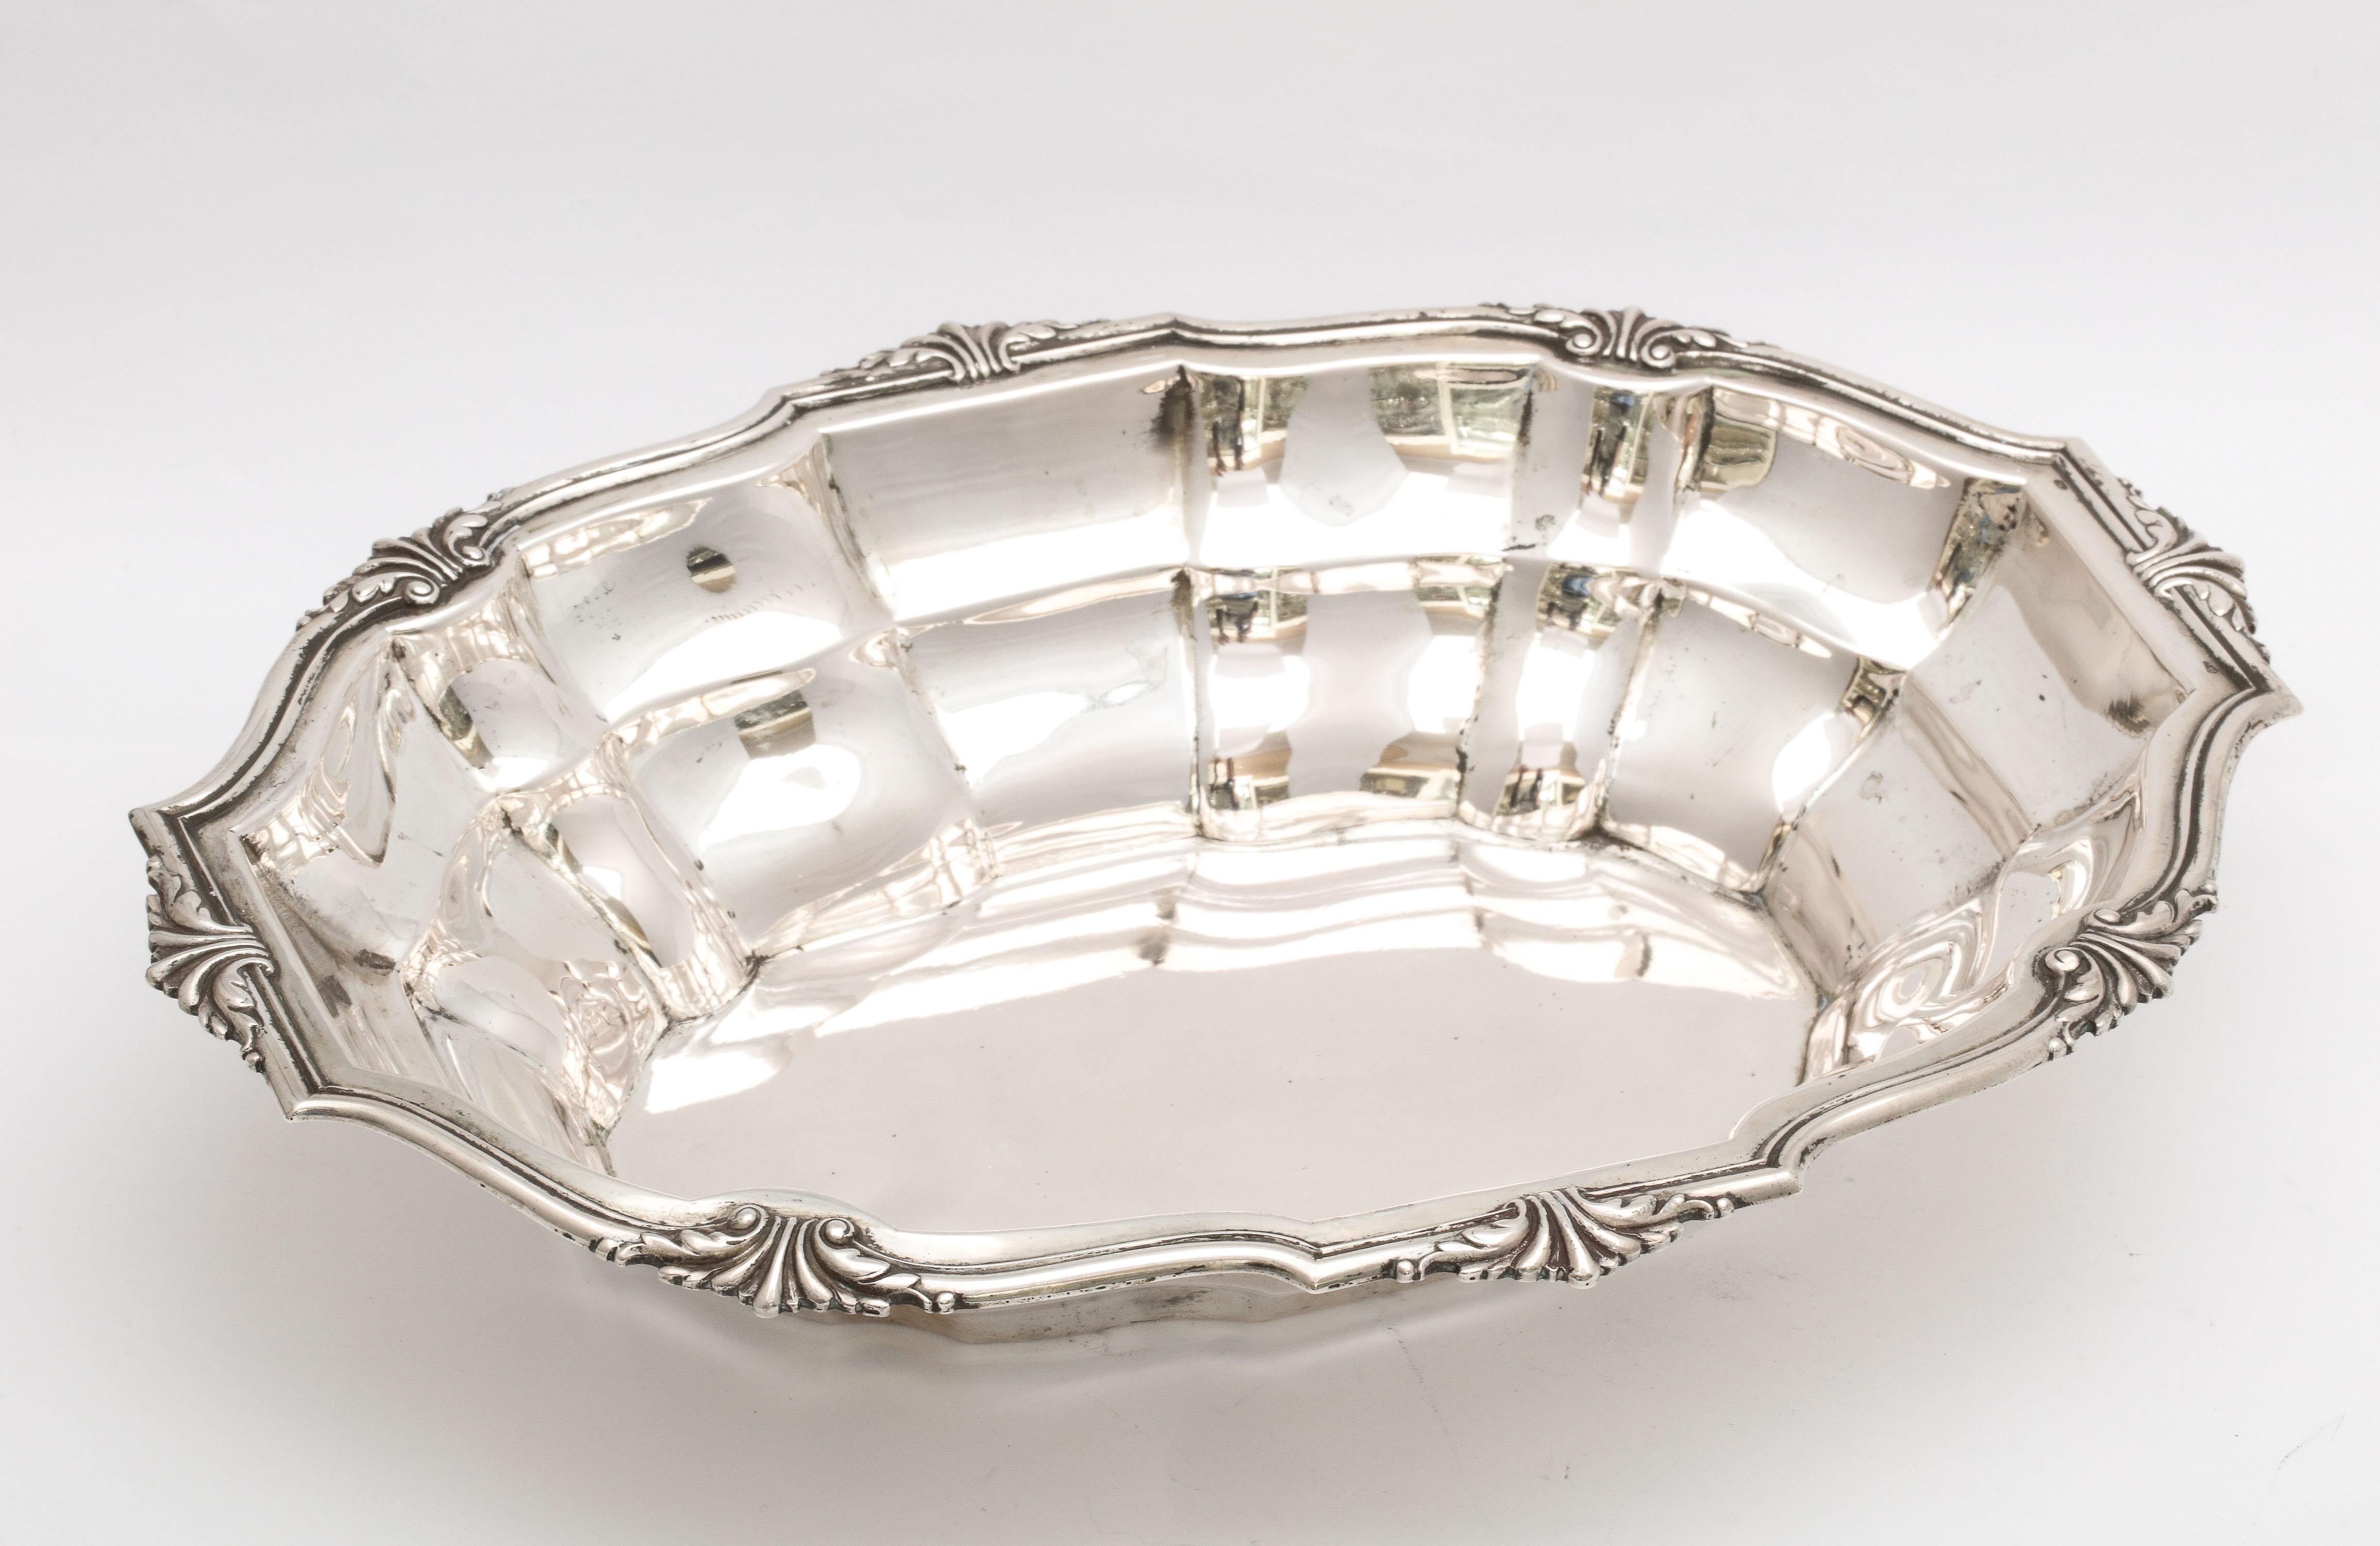 Edwardian Period, Continental Silver (.800) serving bowl, Austria, Ca. 1915. Fluted design. Measures 11 1/2 inches wide x 8 1/2 inches deep x 2 1/4 inches high (at highest point). Weighs 13.085 troy ounces. Dark areas in photos are reflections. In